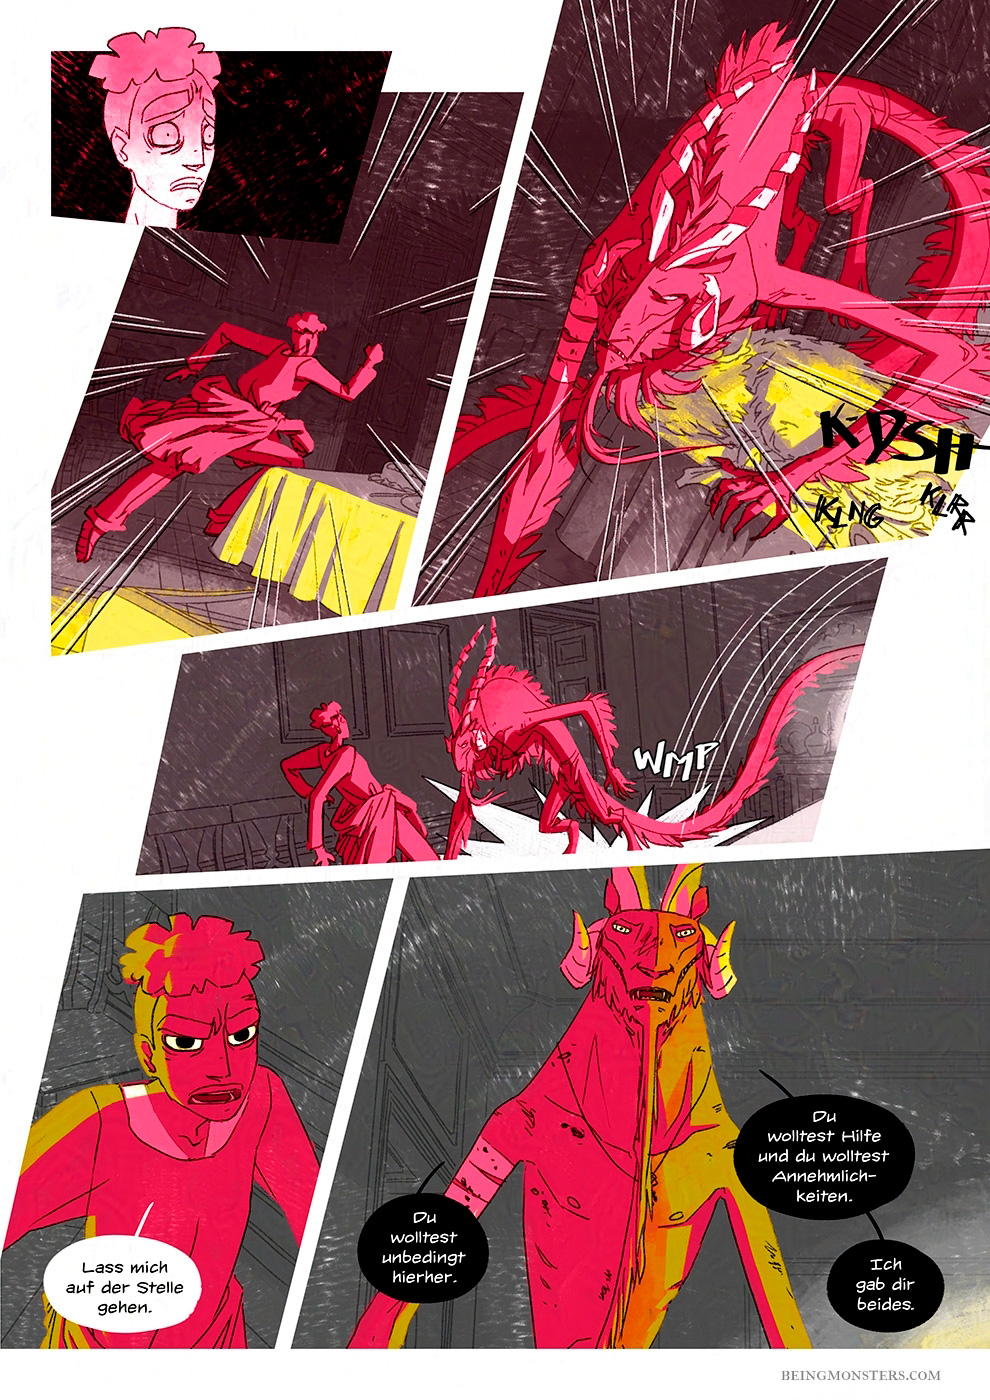 Being Monsters Comic Book 2 Chapter 7 Page 21 EN